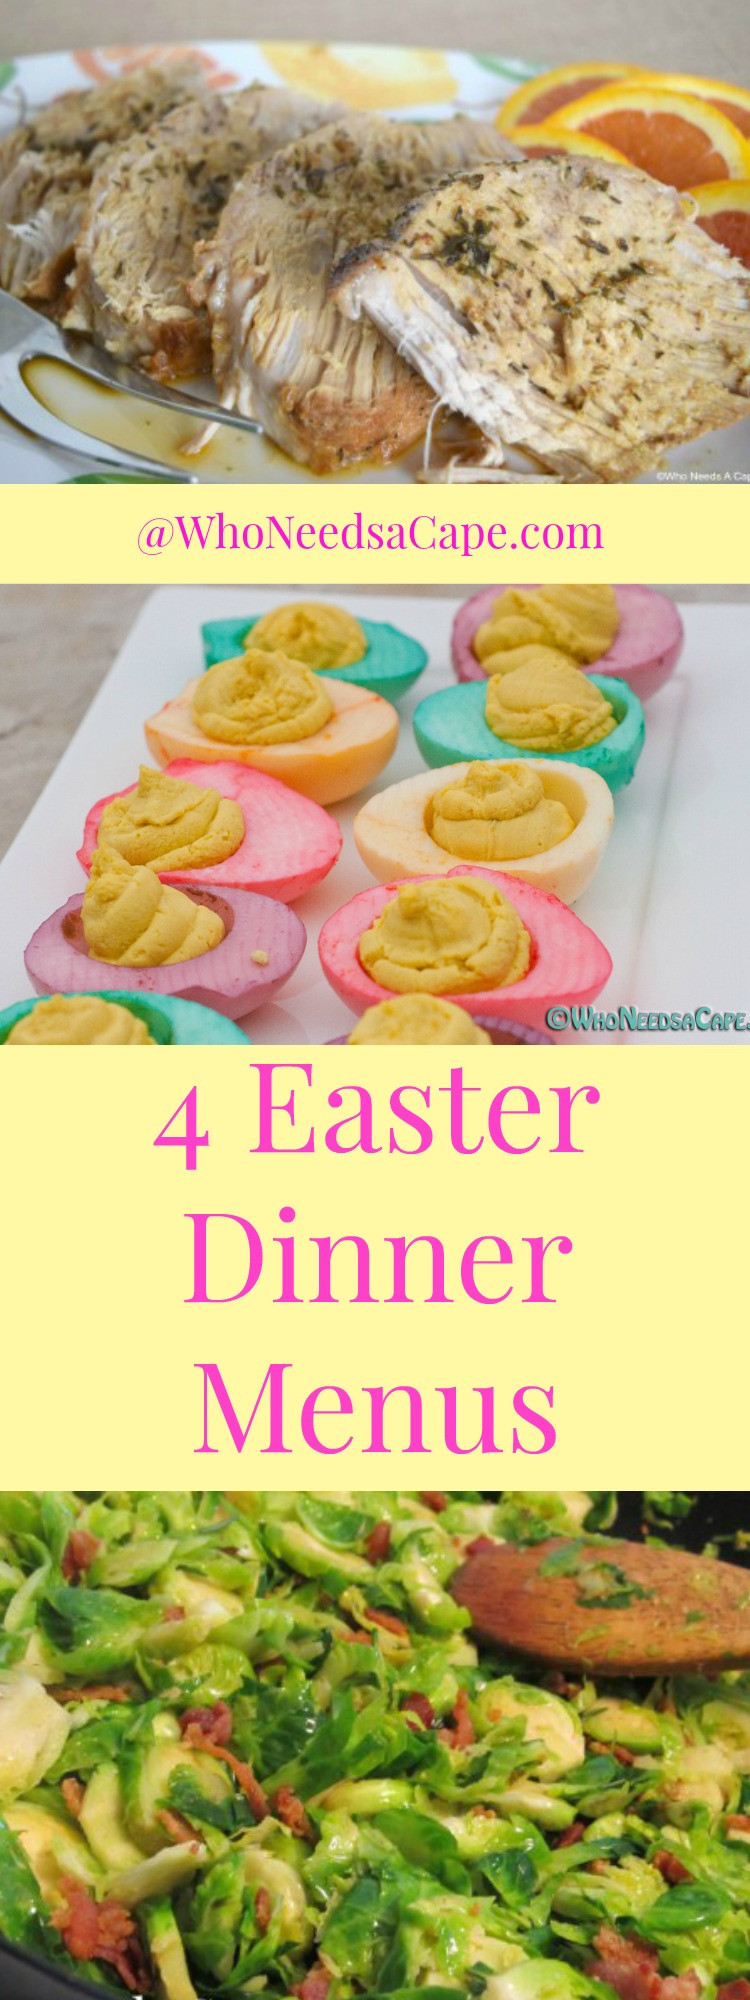 Non Traditional Easter Dinner
 Easter Dinner Menus Who Needs A Cape